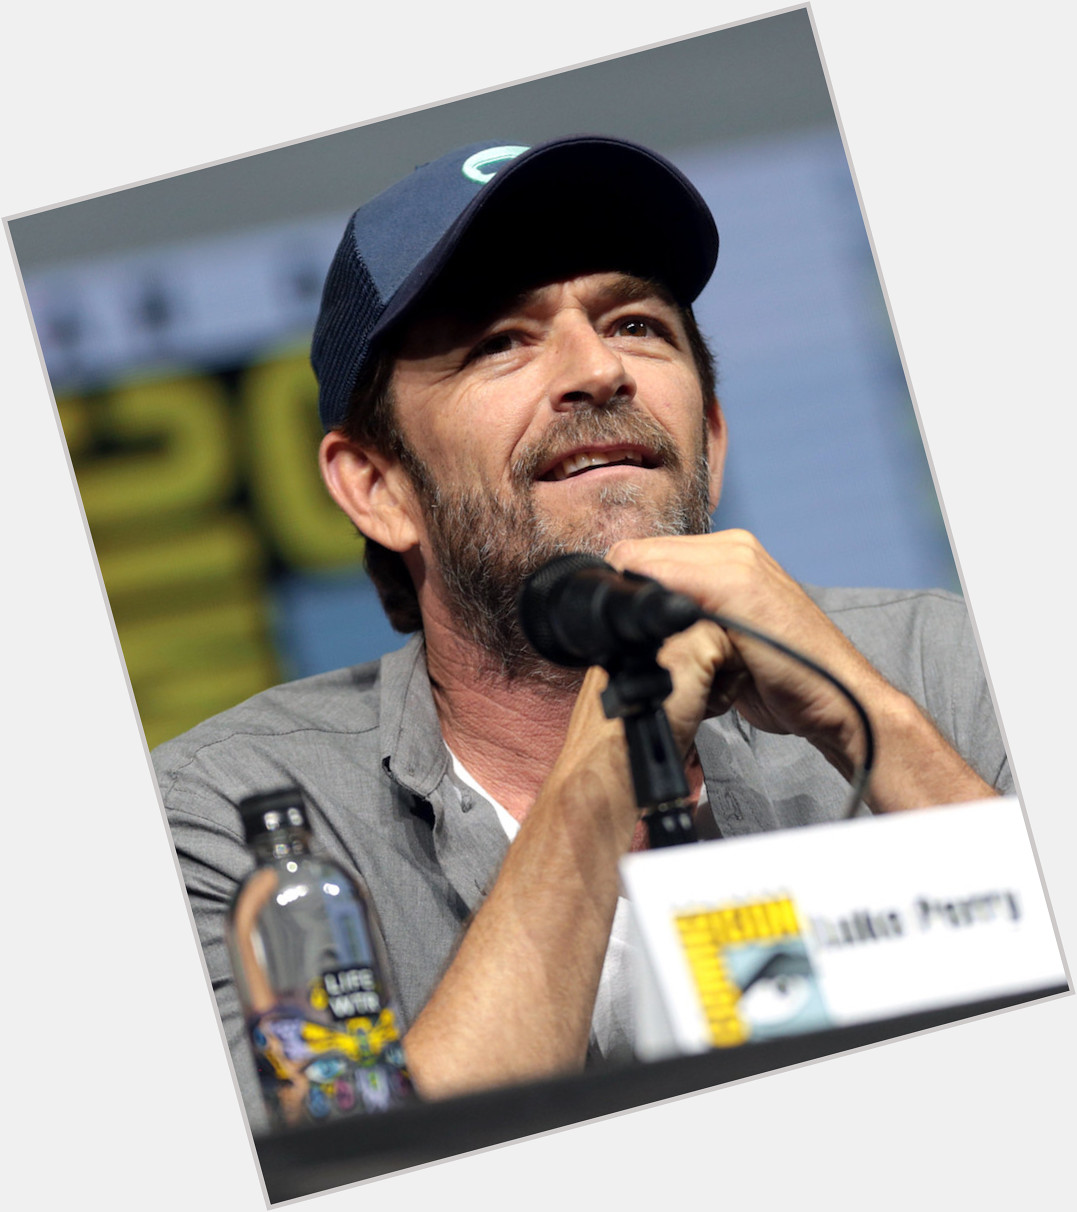 Happy Birthday, to the late Luke Perry
For Disney, he voiced Stewart Walldinger in 